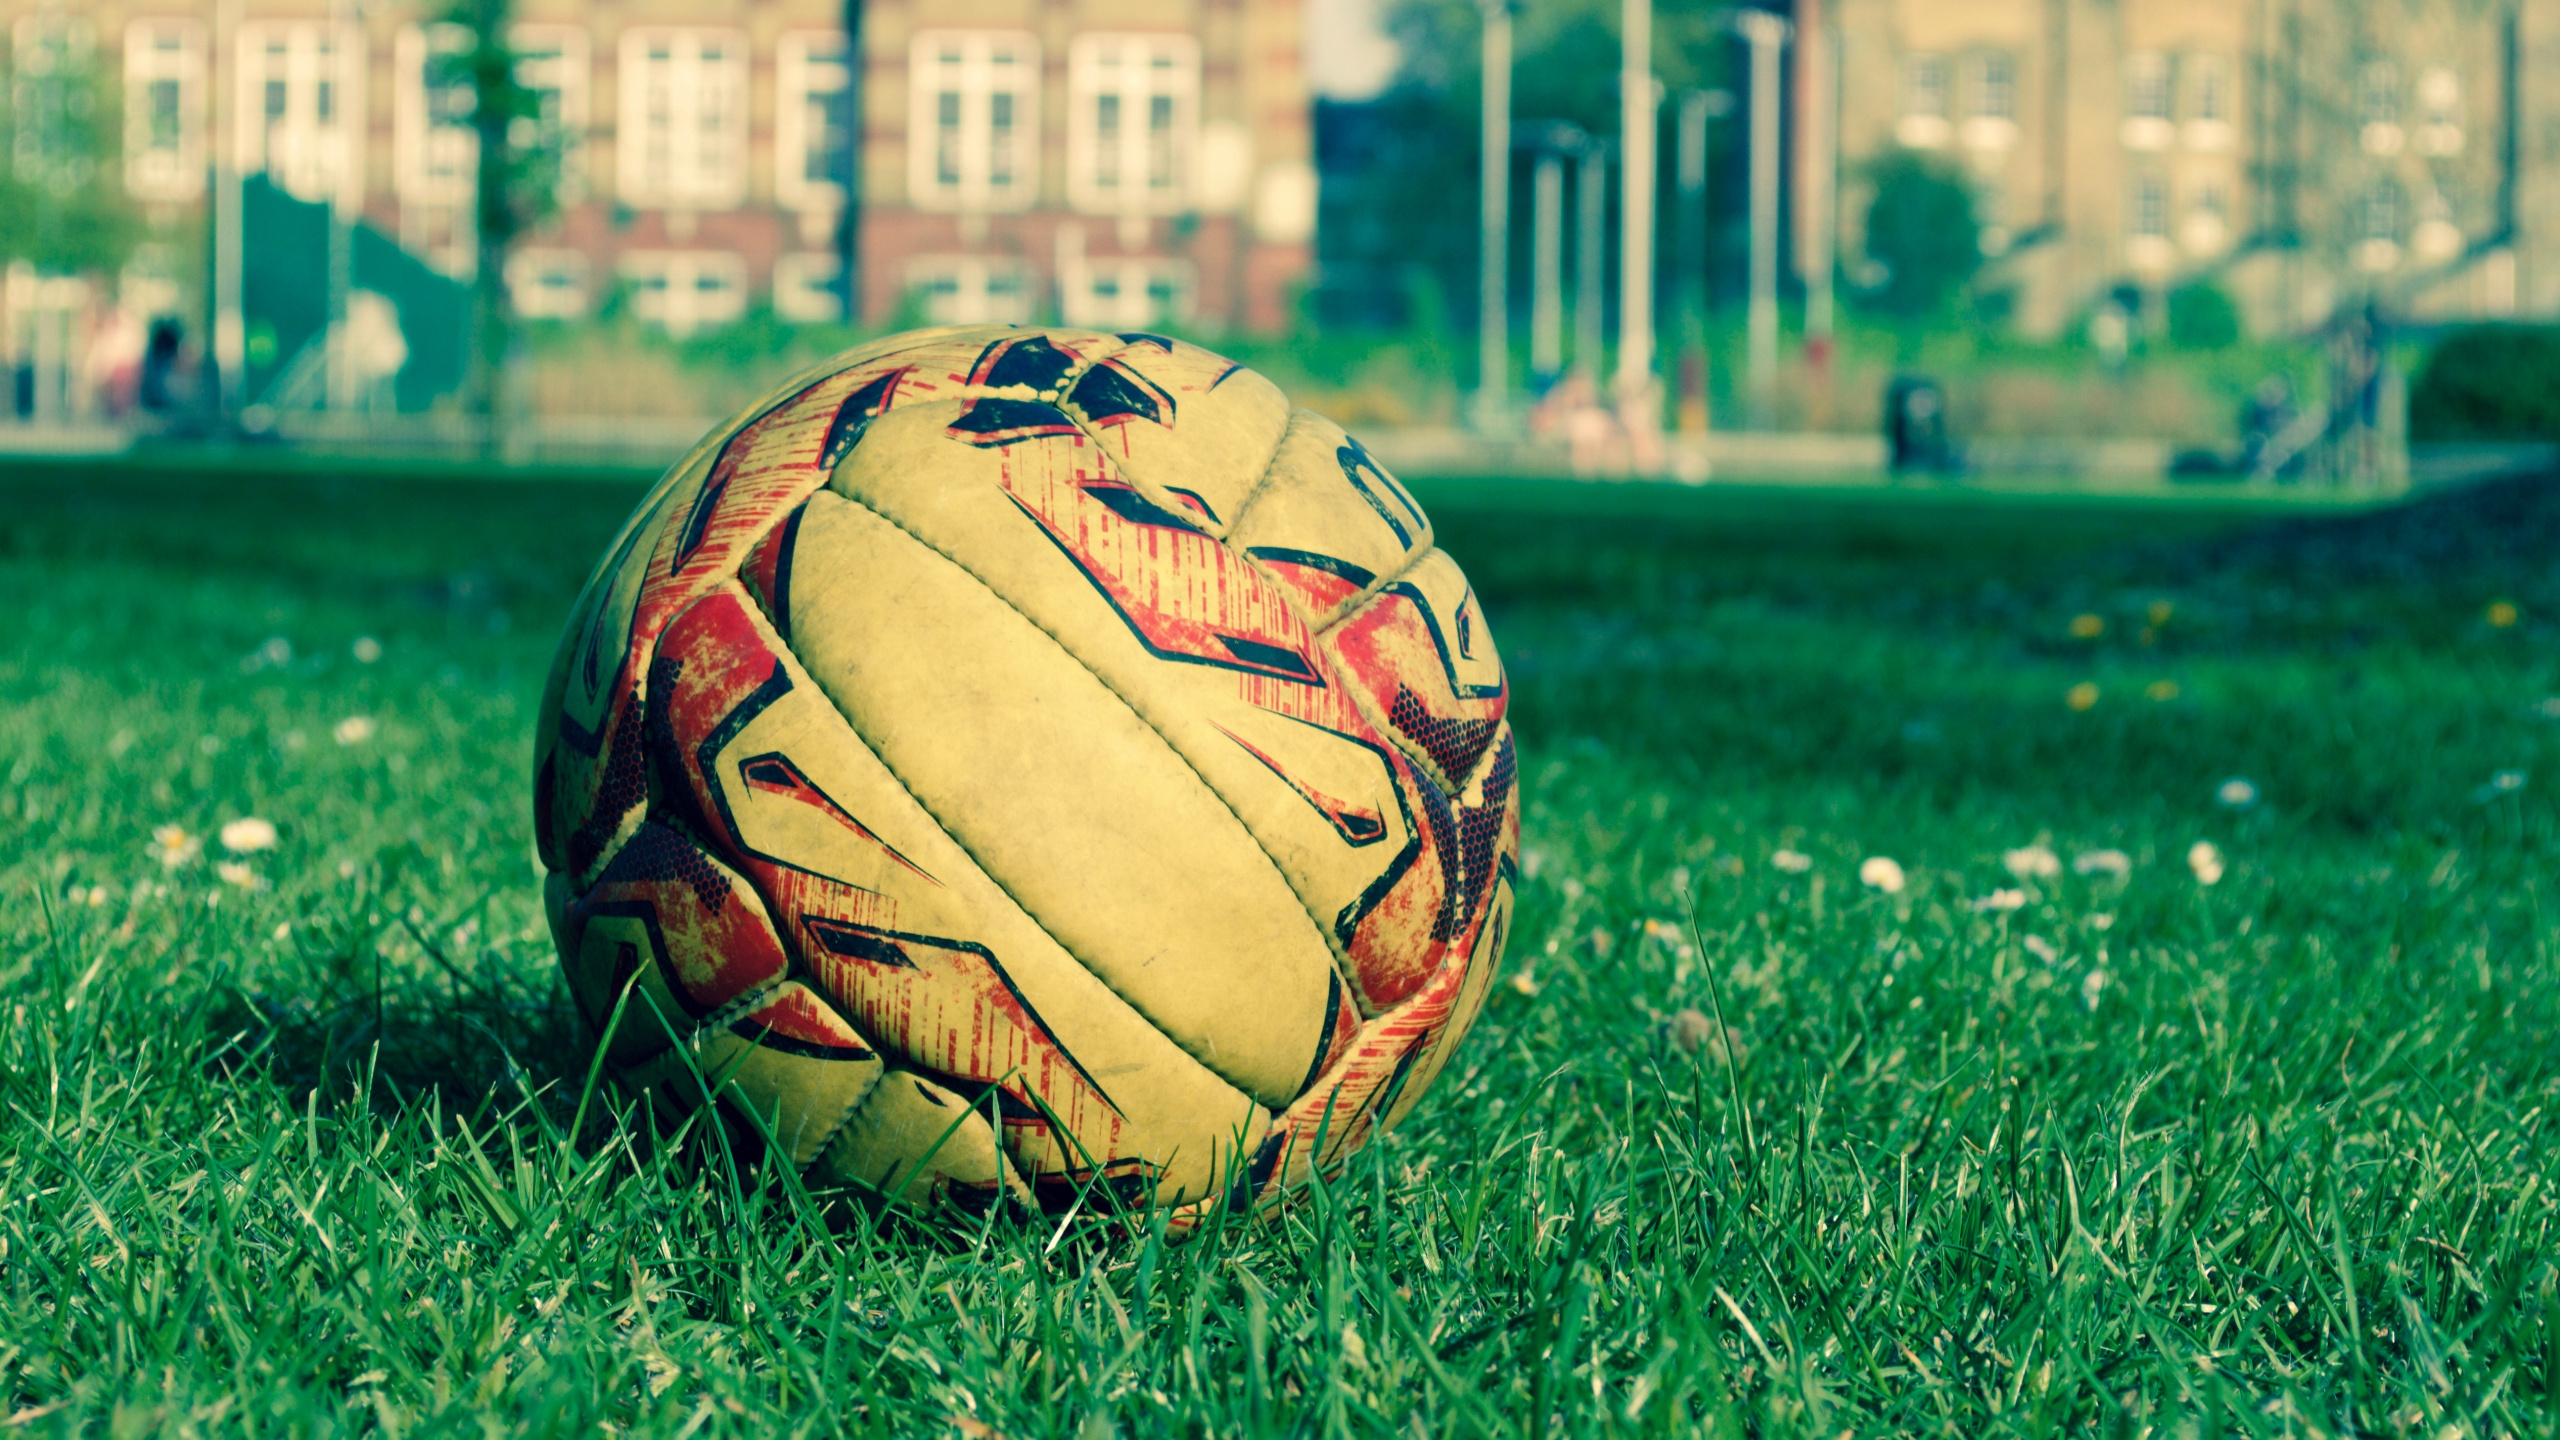 Brown and Black Soccer Ball on Green Grass Field During Daytime. Wallpaper in 2560x1440 Resolution